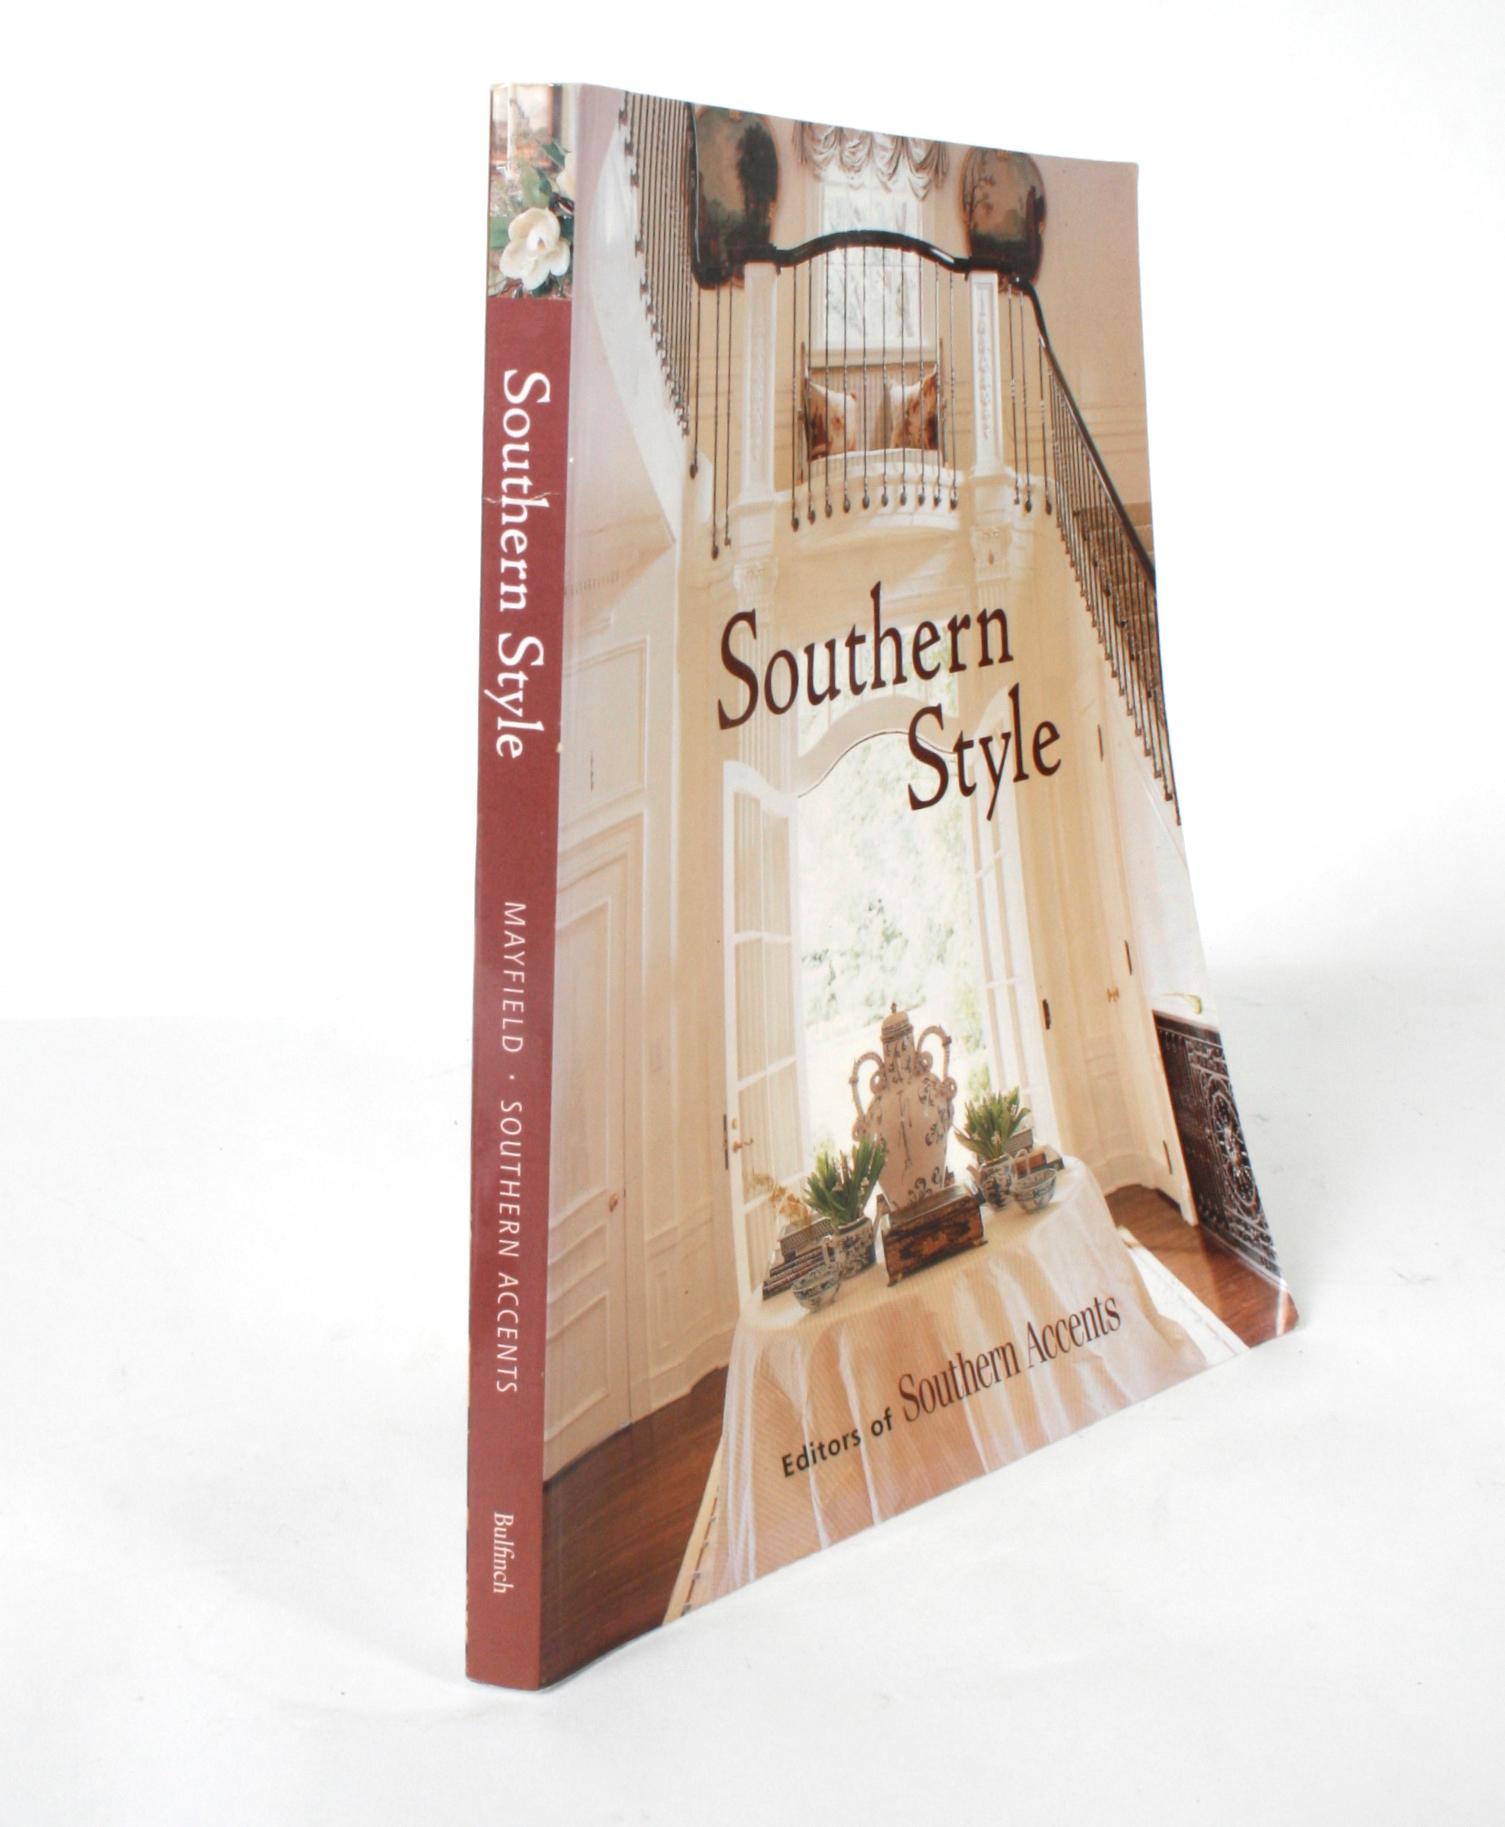 Southern Style by Mark Mayfield, First Edition 13